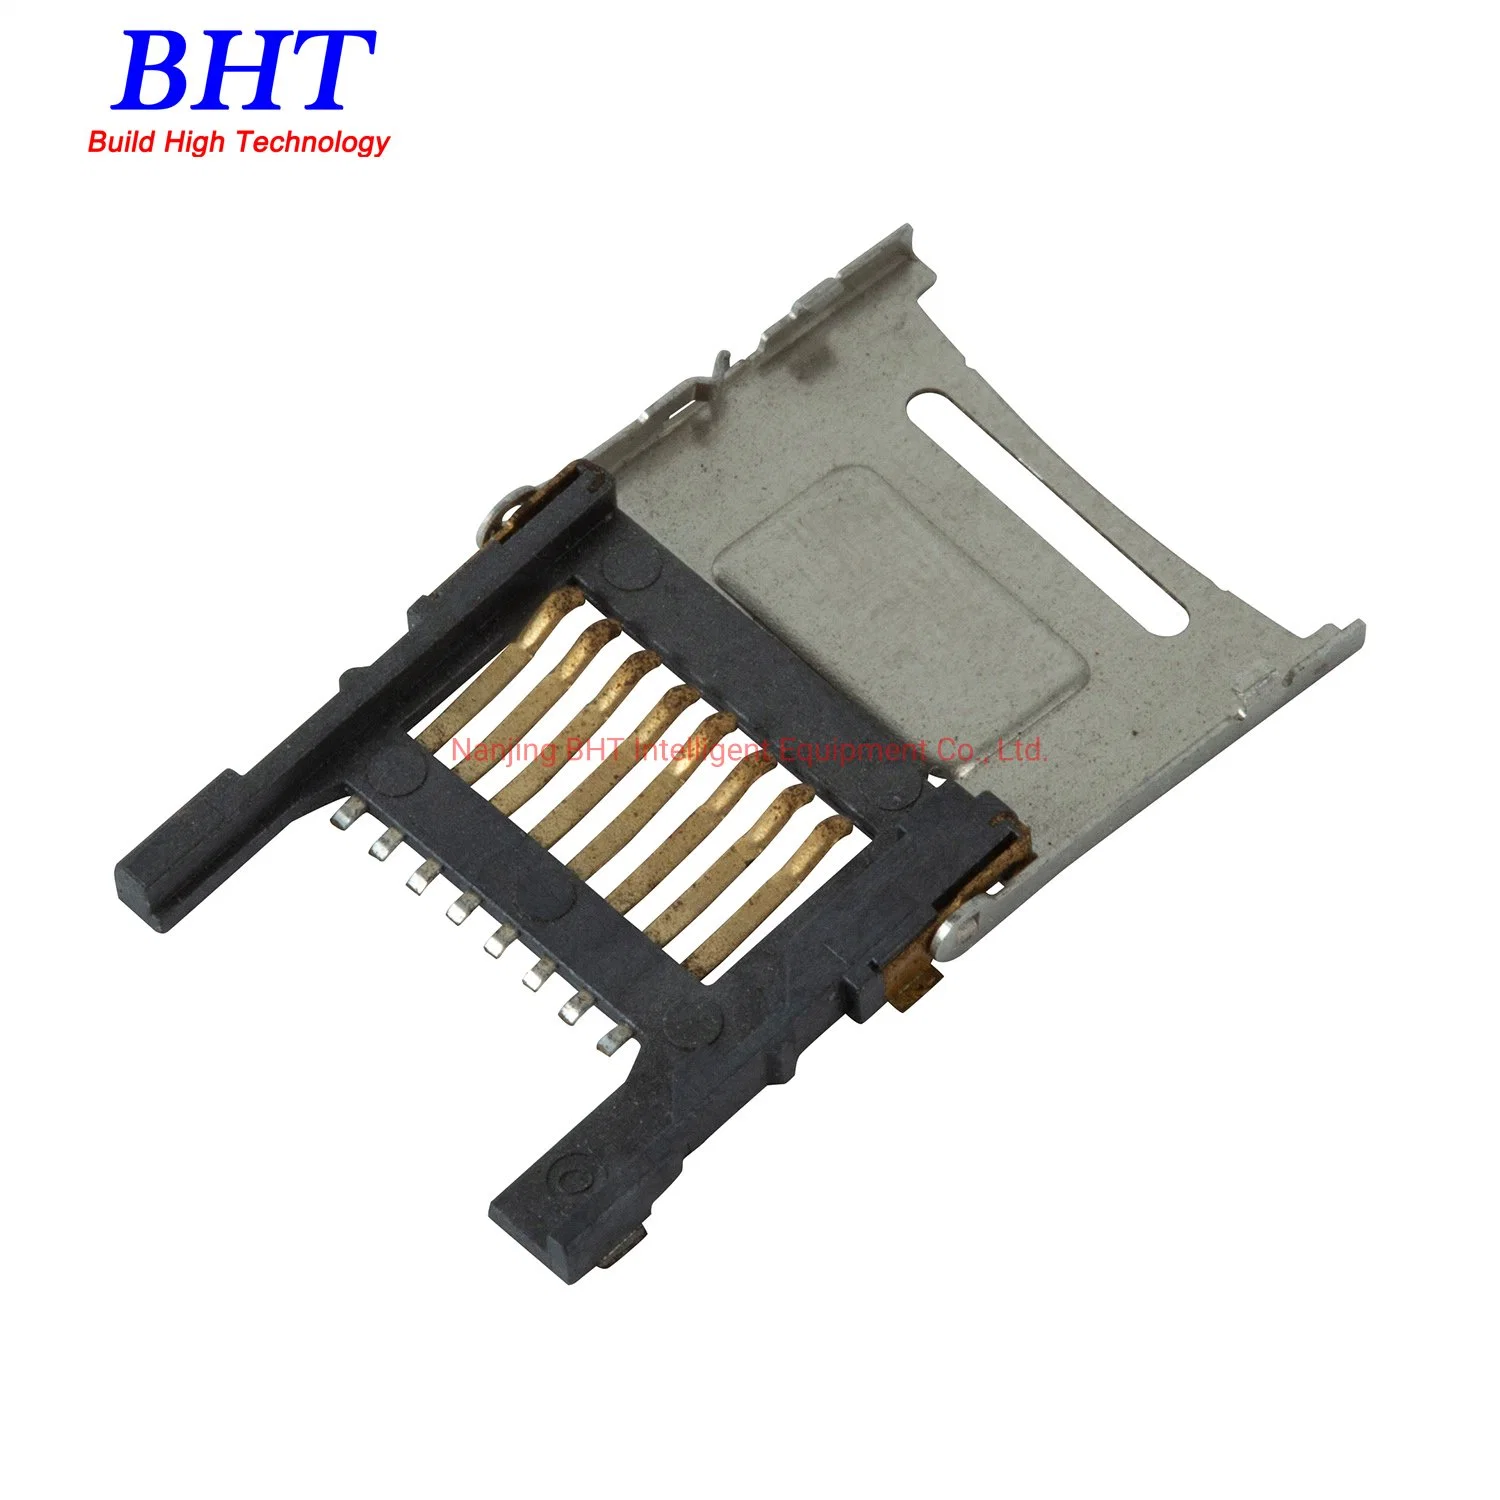 Connector of Micro / Nano SIM Card Holder, Mobile Terminal Holder From Injection Molding Manufacturing